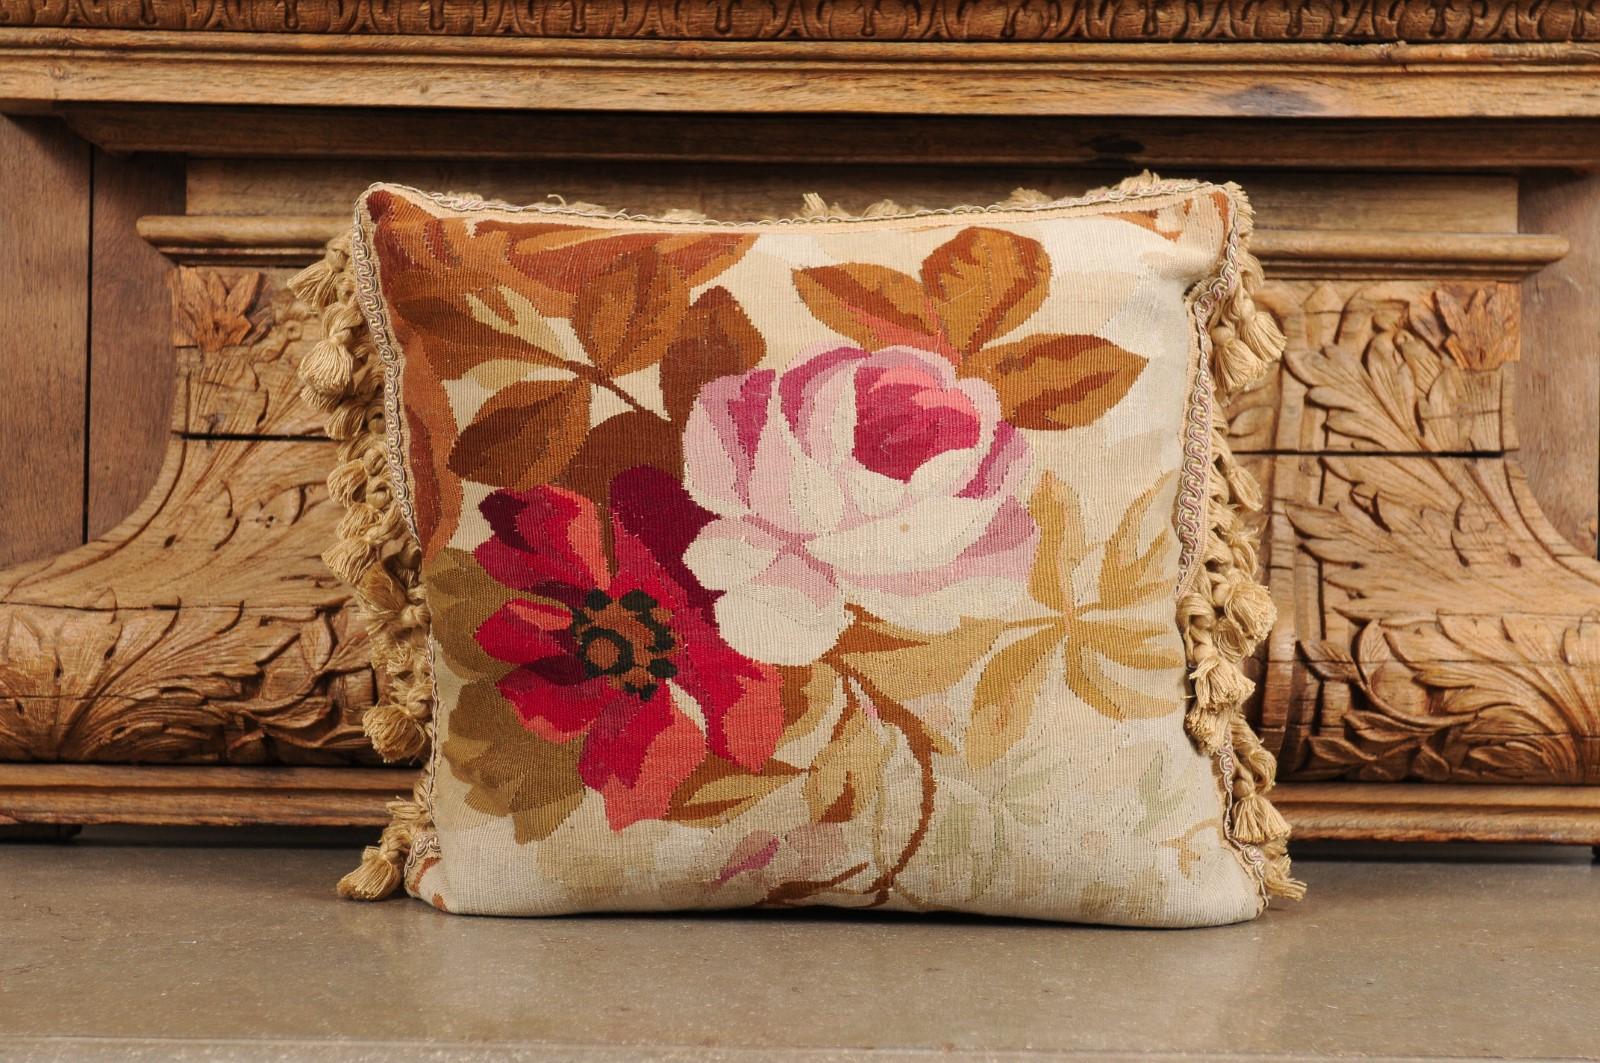 A French 19th century Aubusson tapestry pillow, with floral décor and tassels. Created during the 19th century in the Aubusson tapestry manufacture located in central France, this pillow features a pink rose and a red flower, perfectly accented by